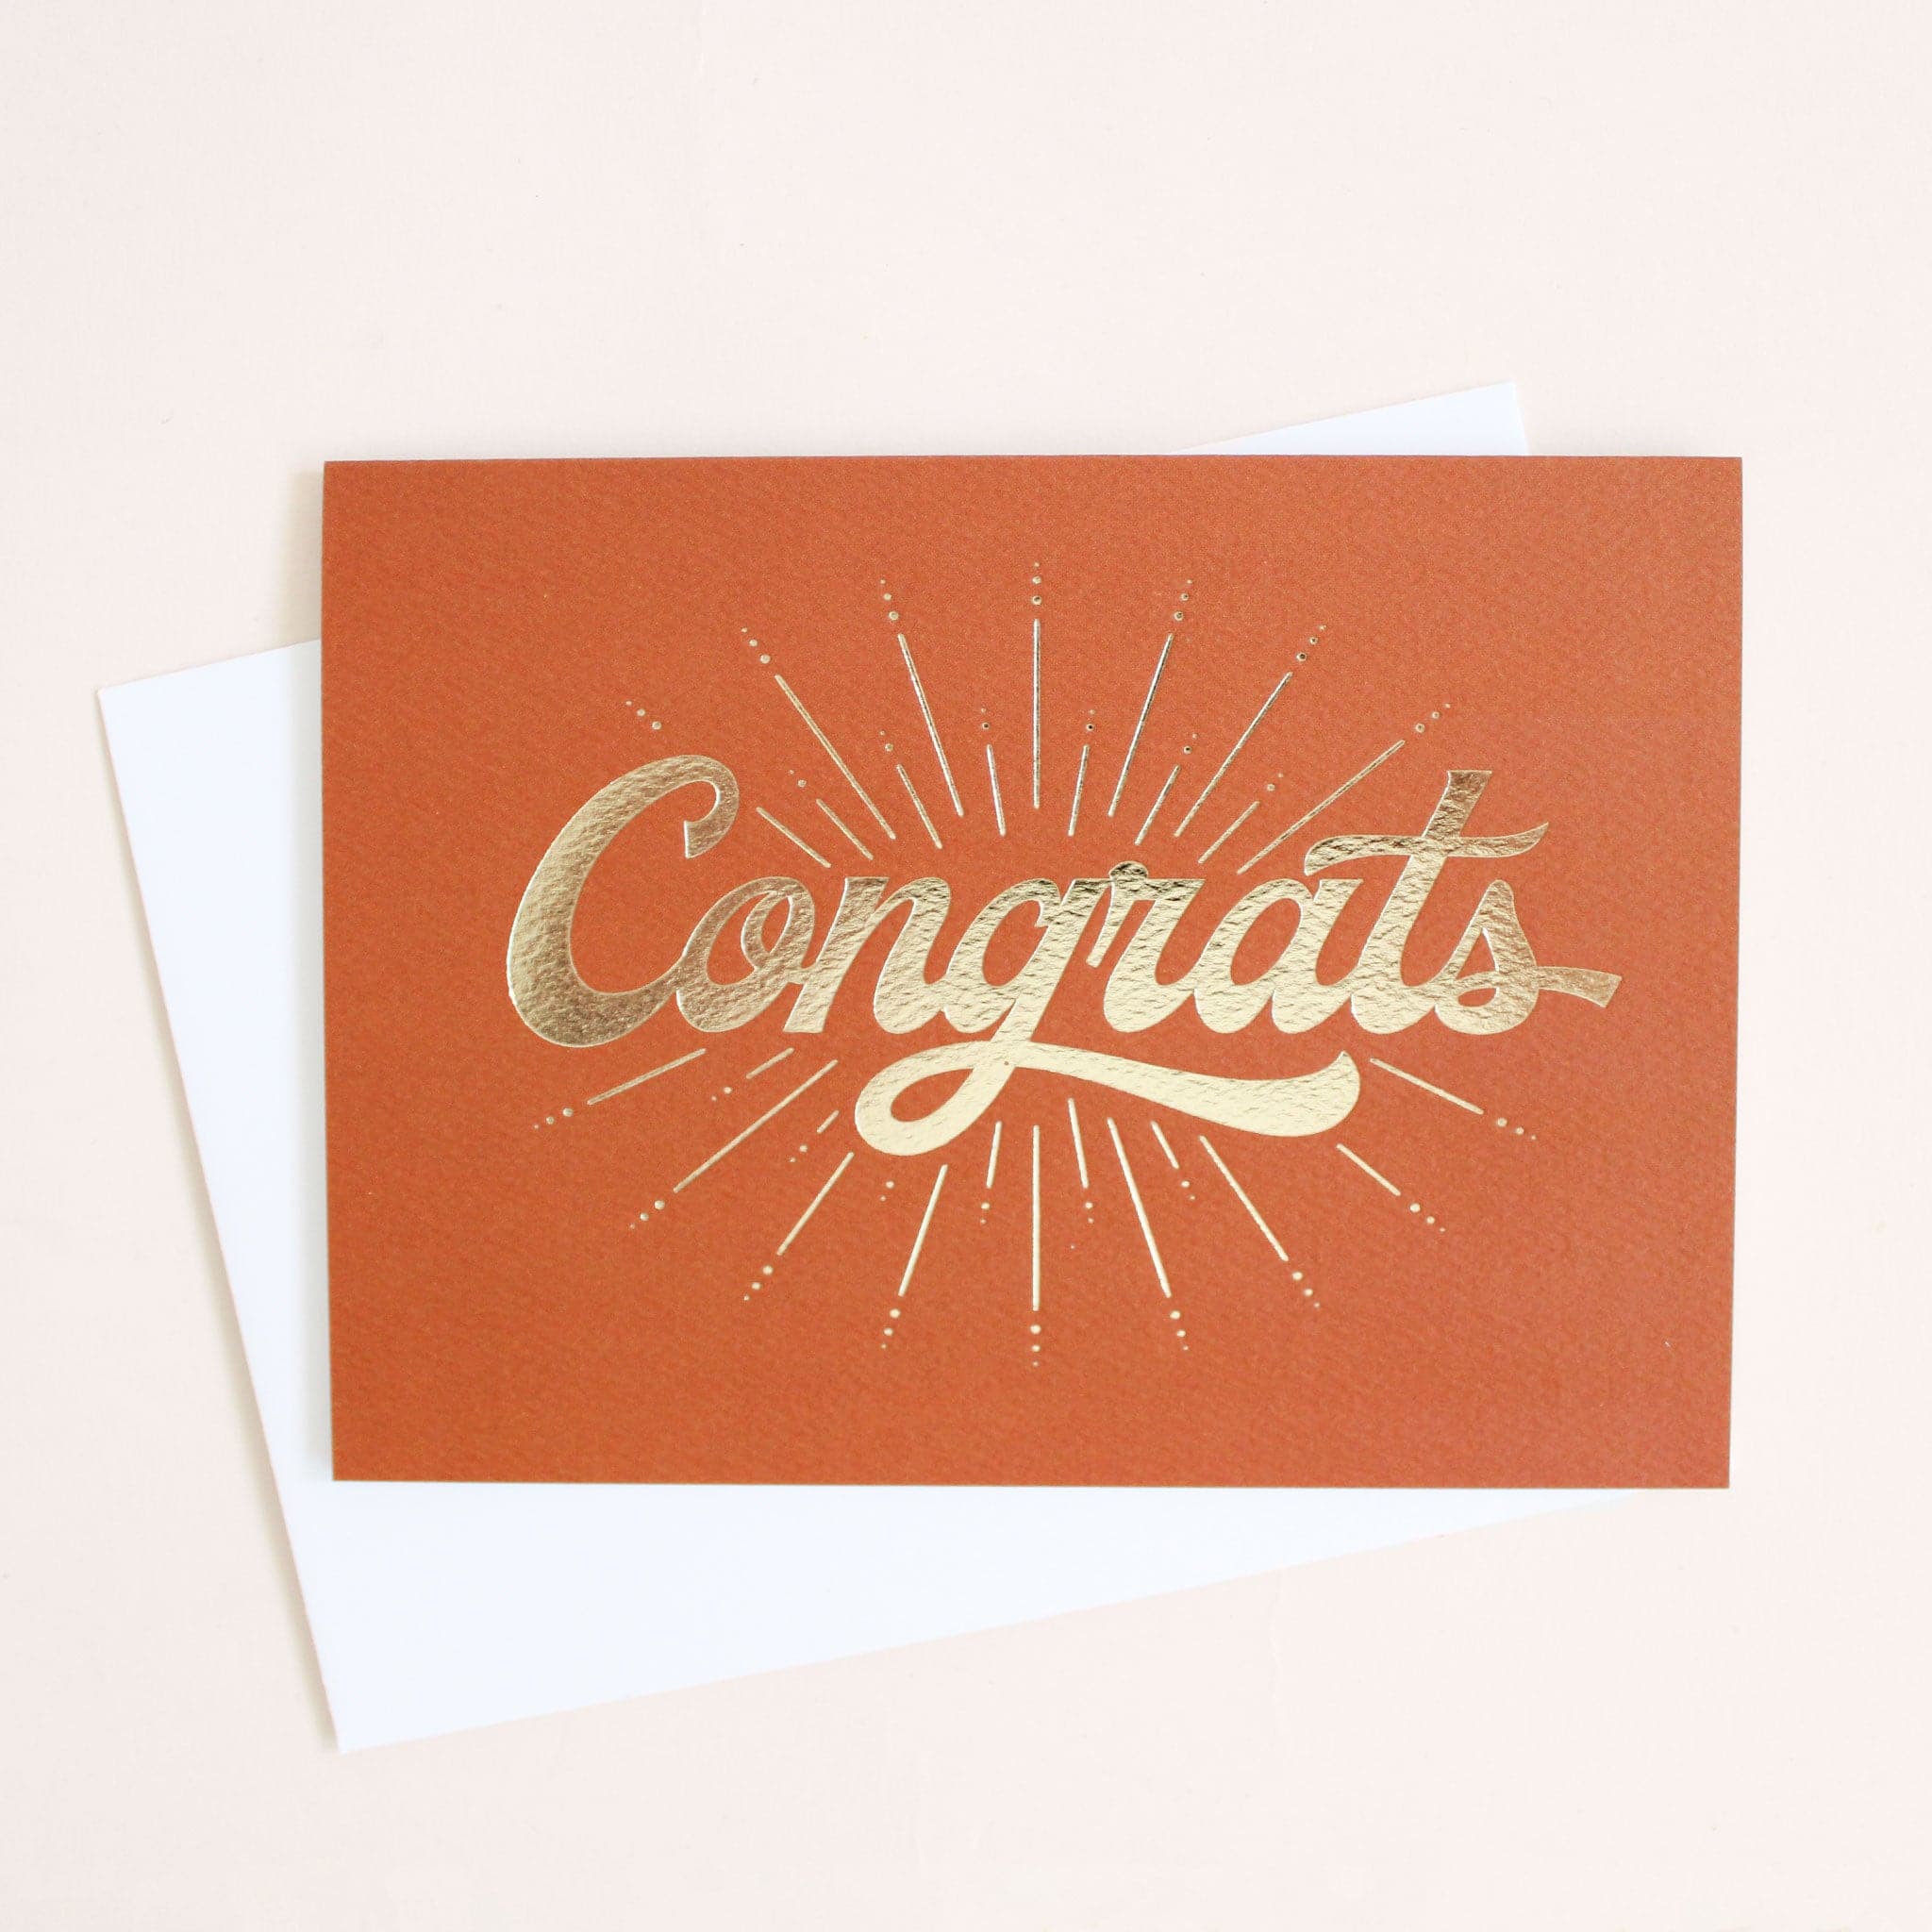 deep orange colored greeting card with a gold foil starburst design surrounding the word congrats.